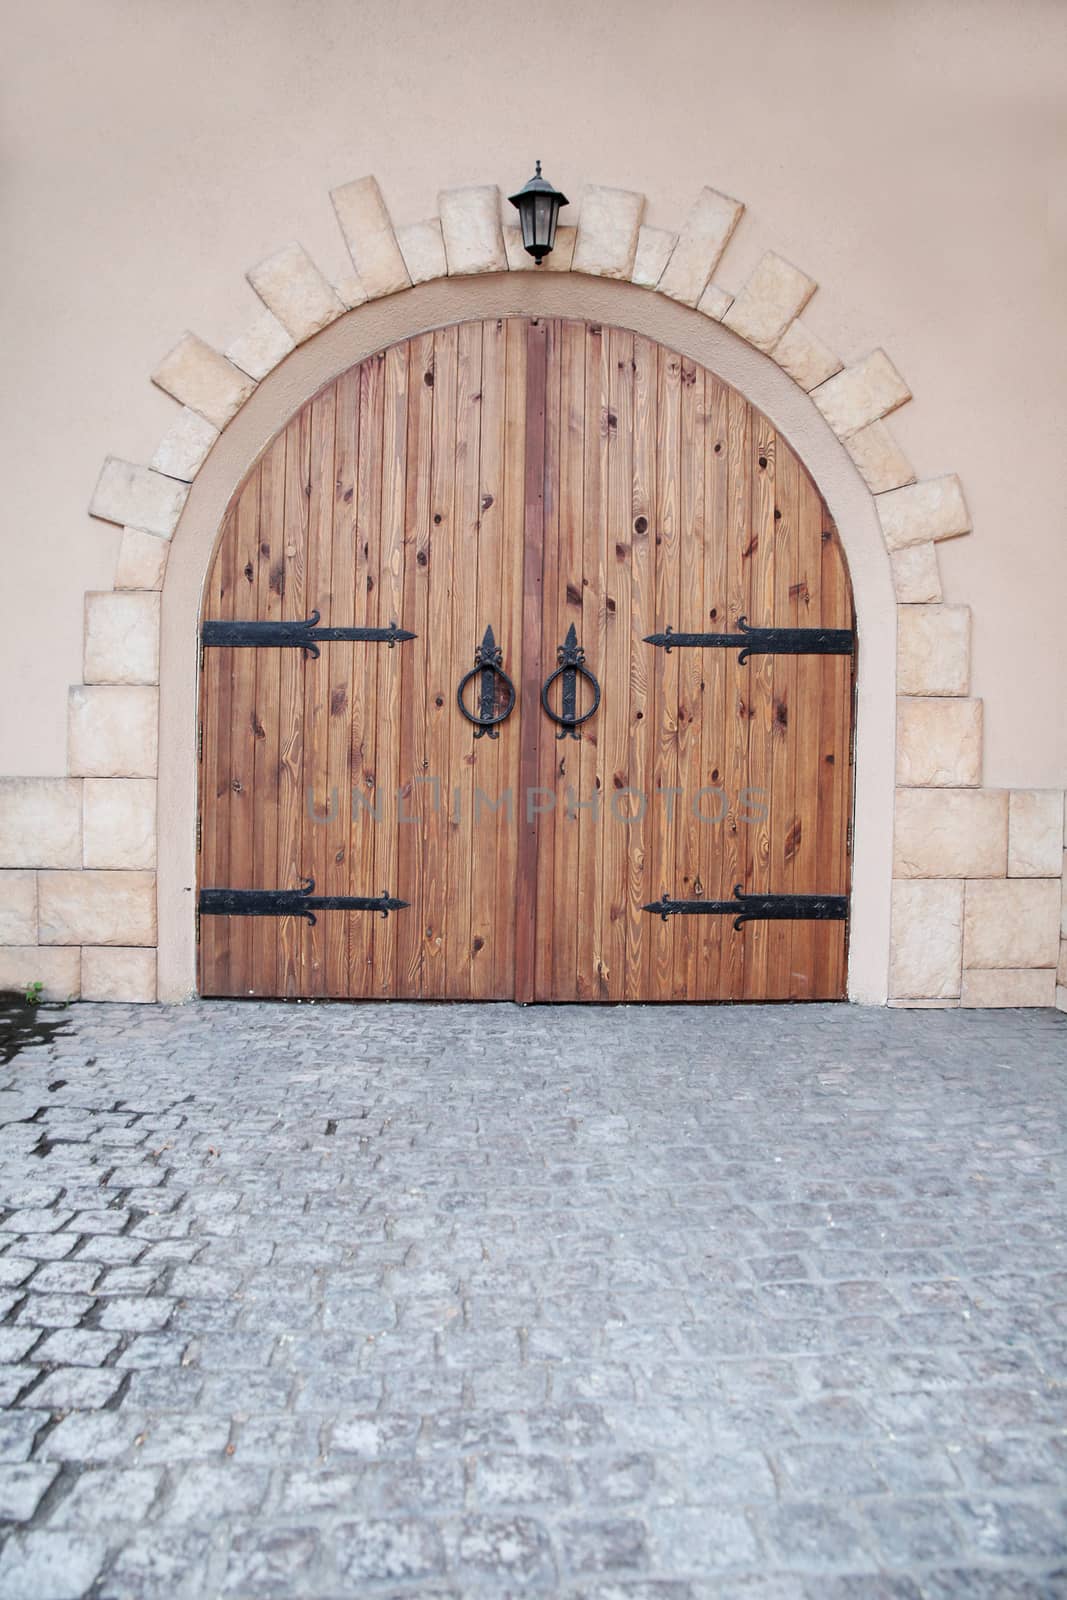 Arched medieval wooden door in a stone wall